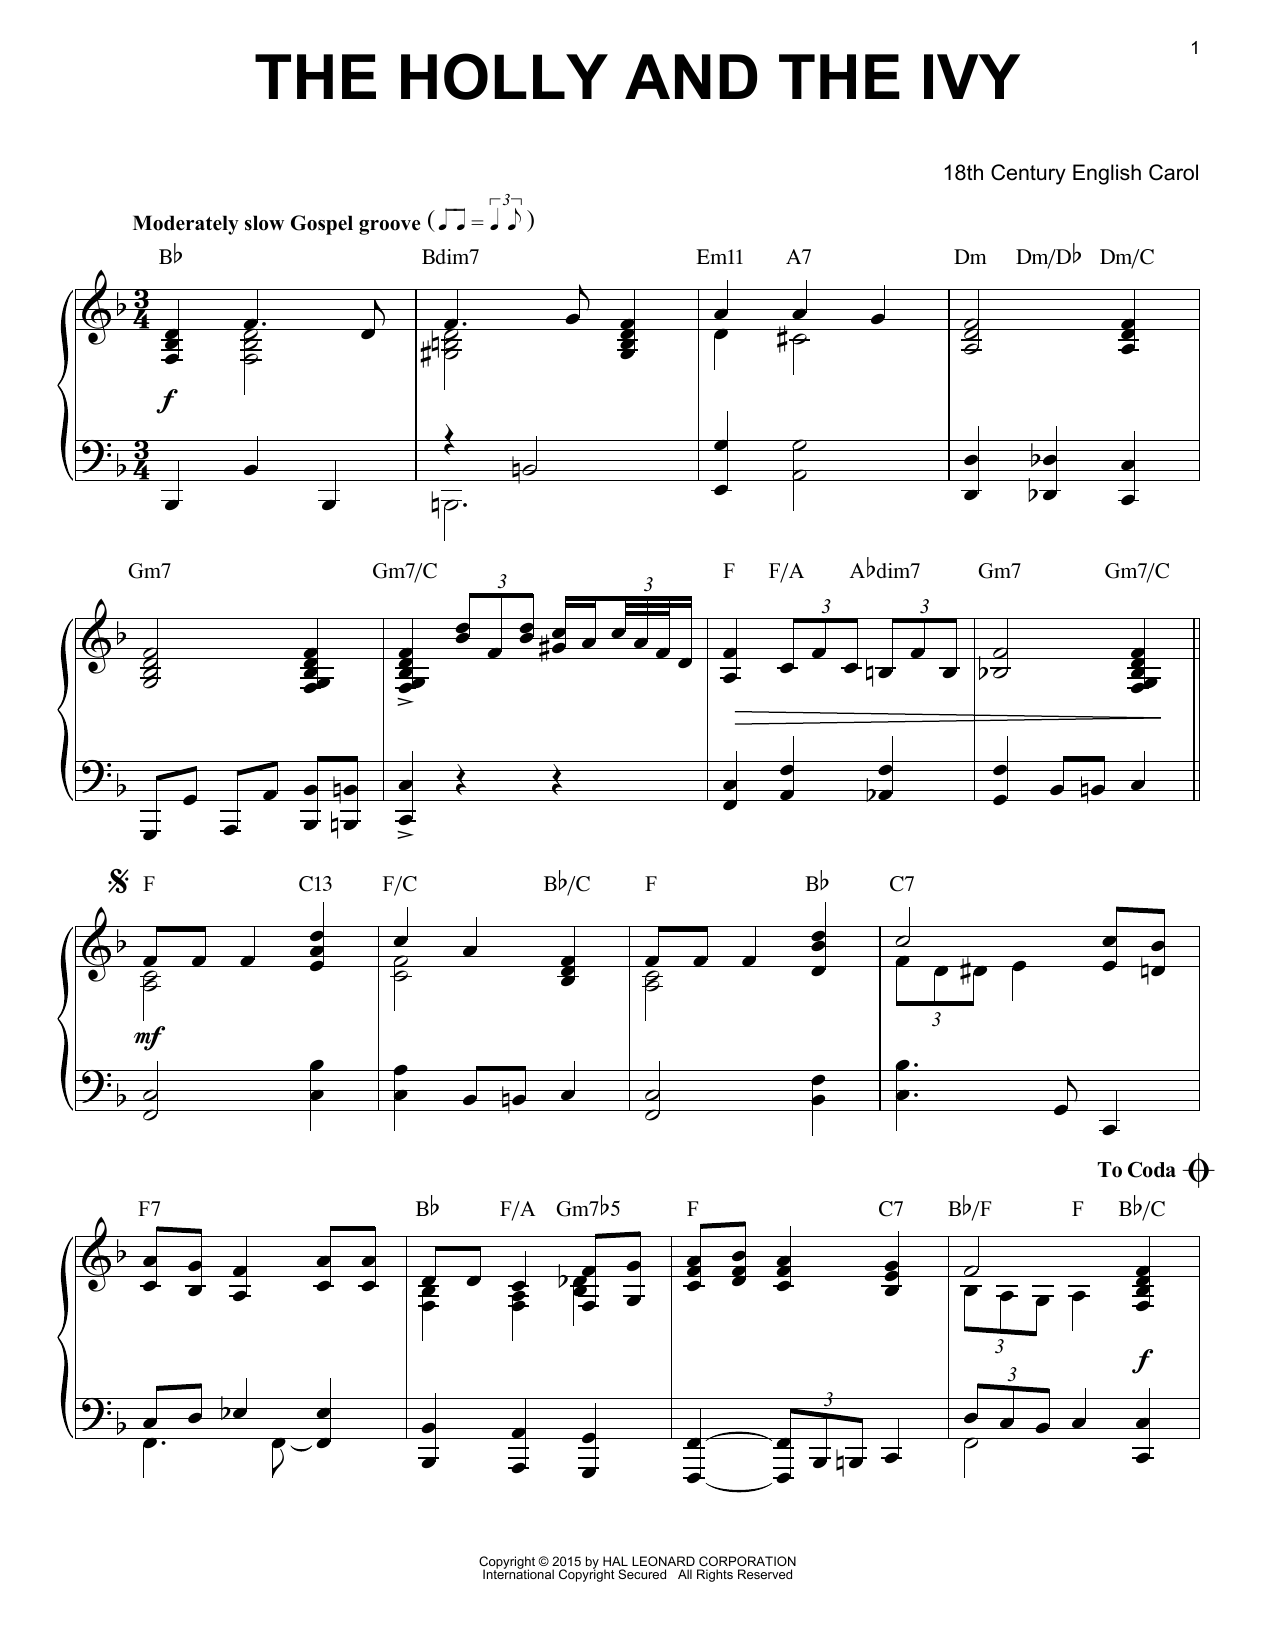 Download 18th Century English Carol The Holly And The Ivy [Jazz version] (a Sheet Music